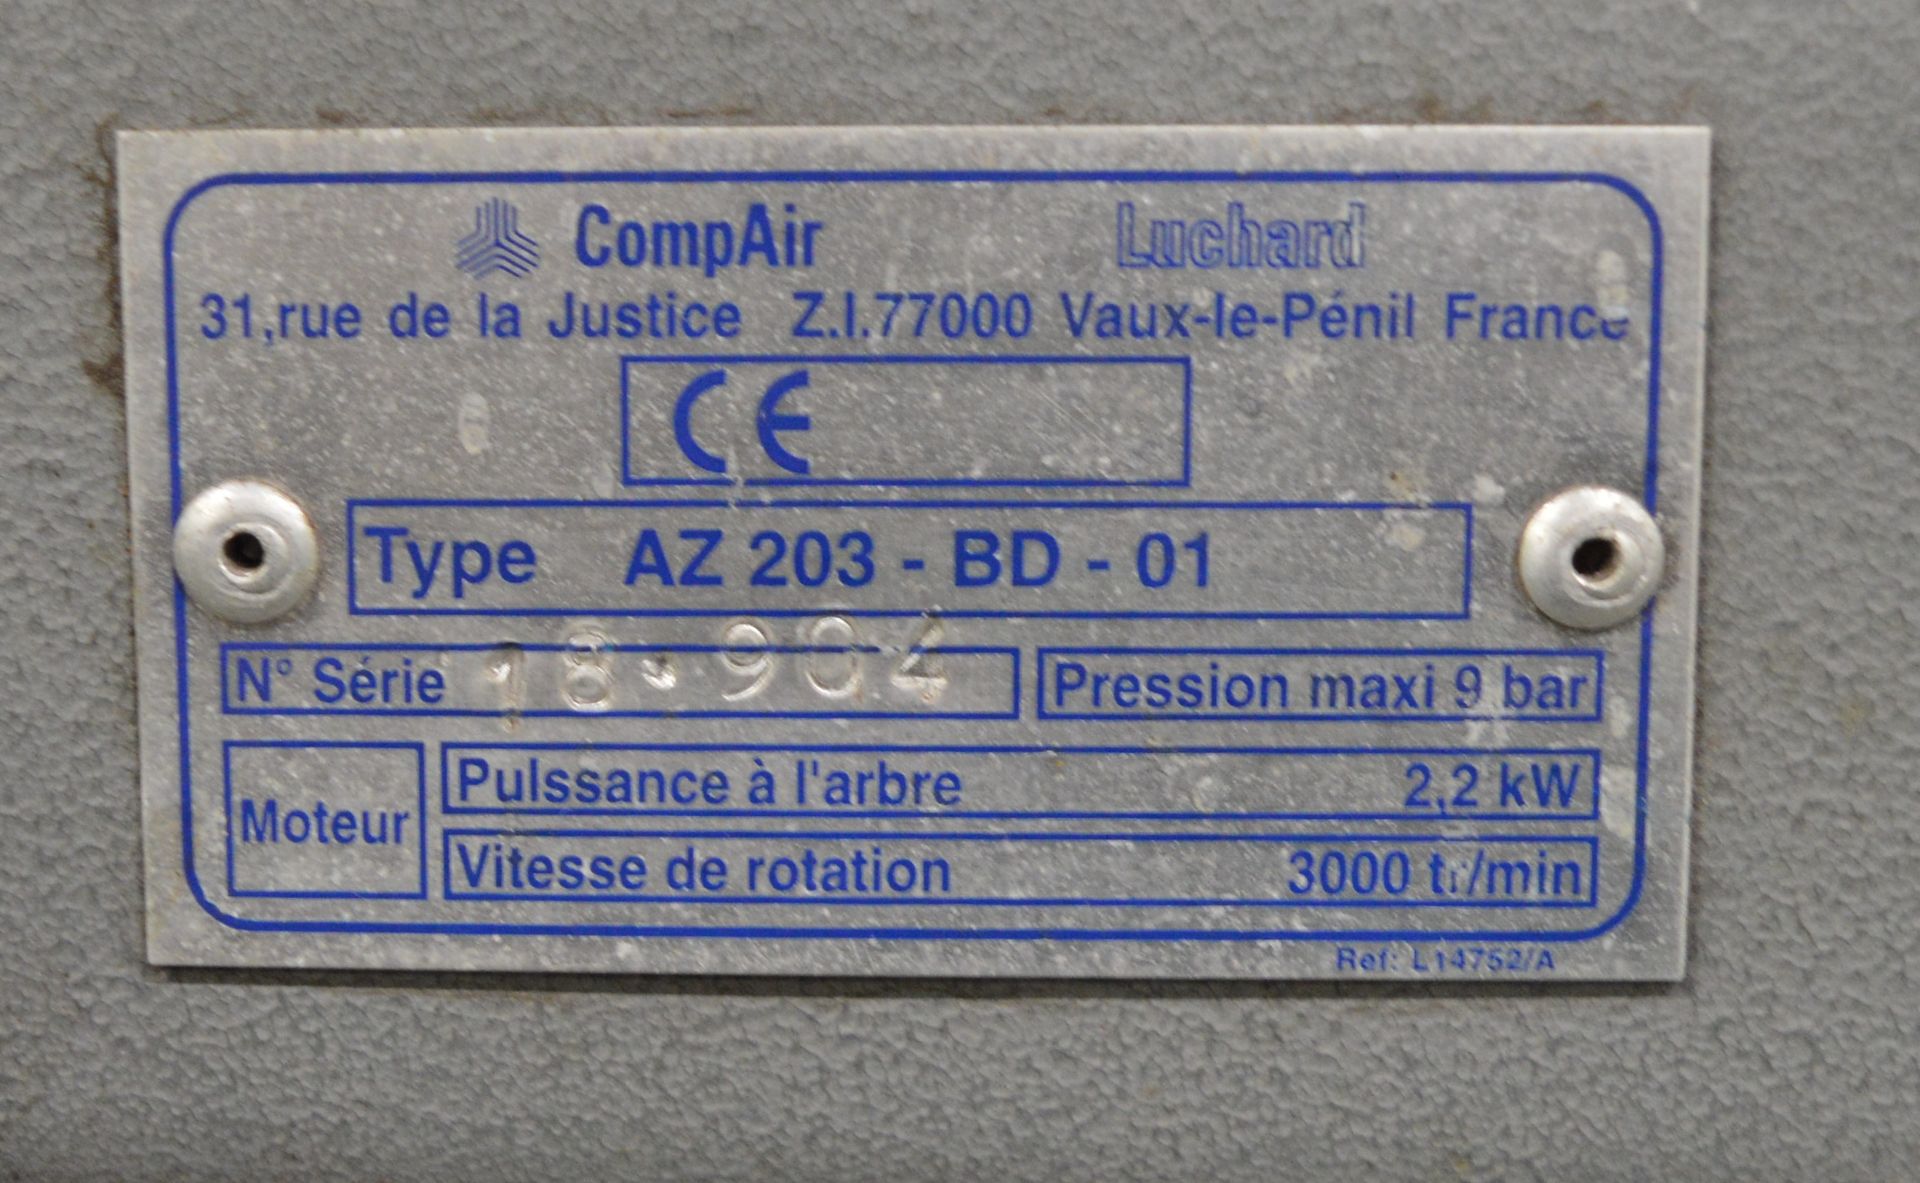 Compair Luchard Air Compressor. - Image 2 of 2